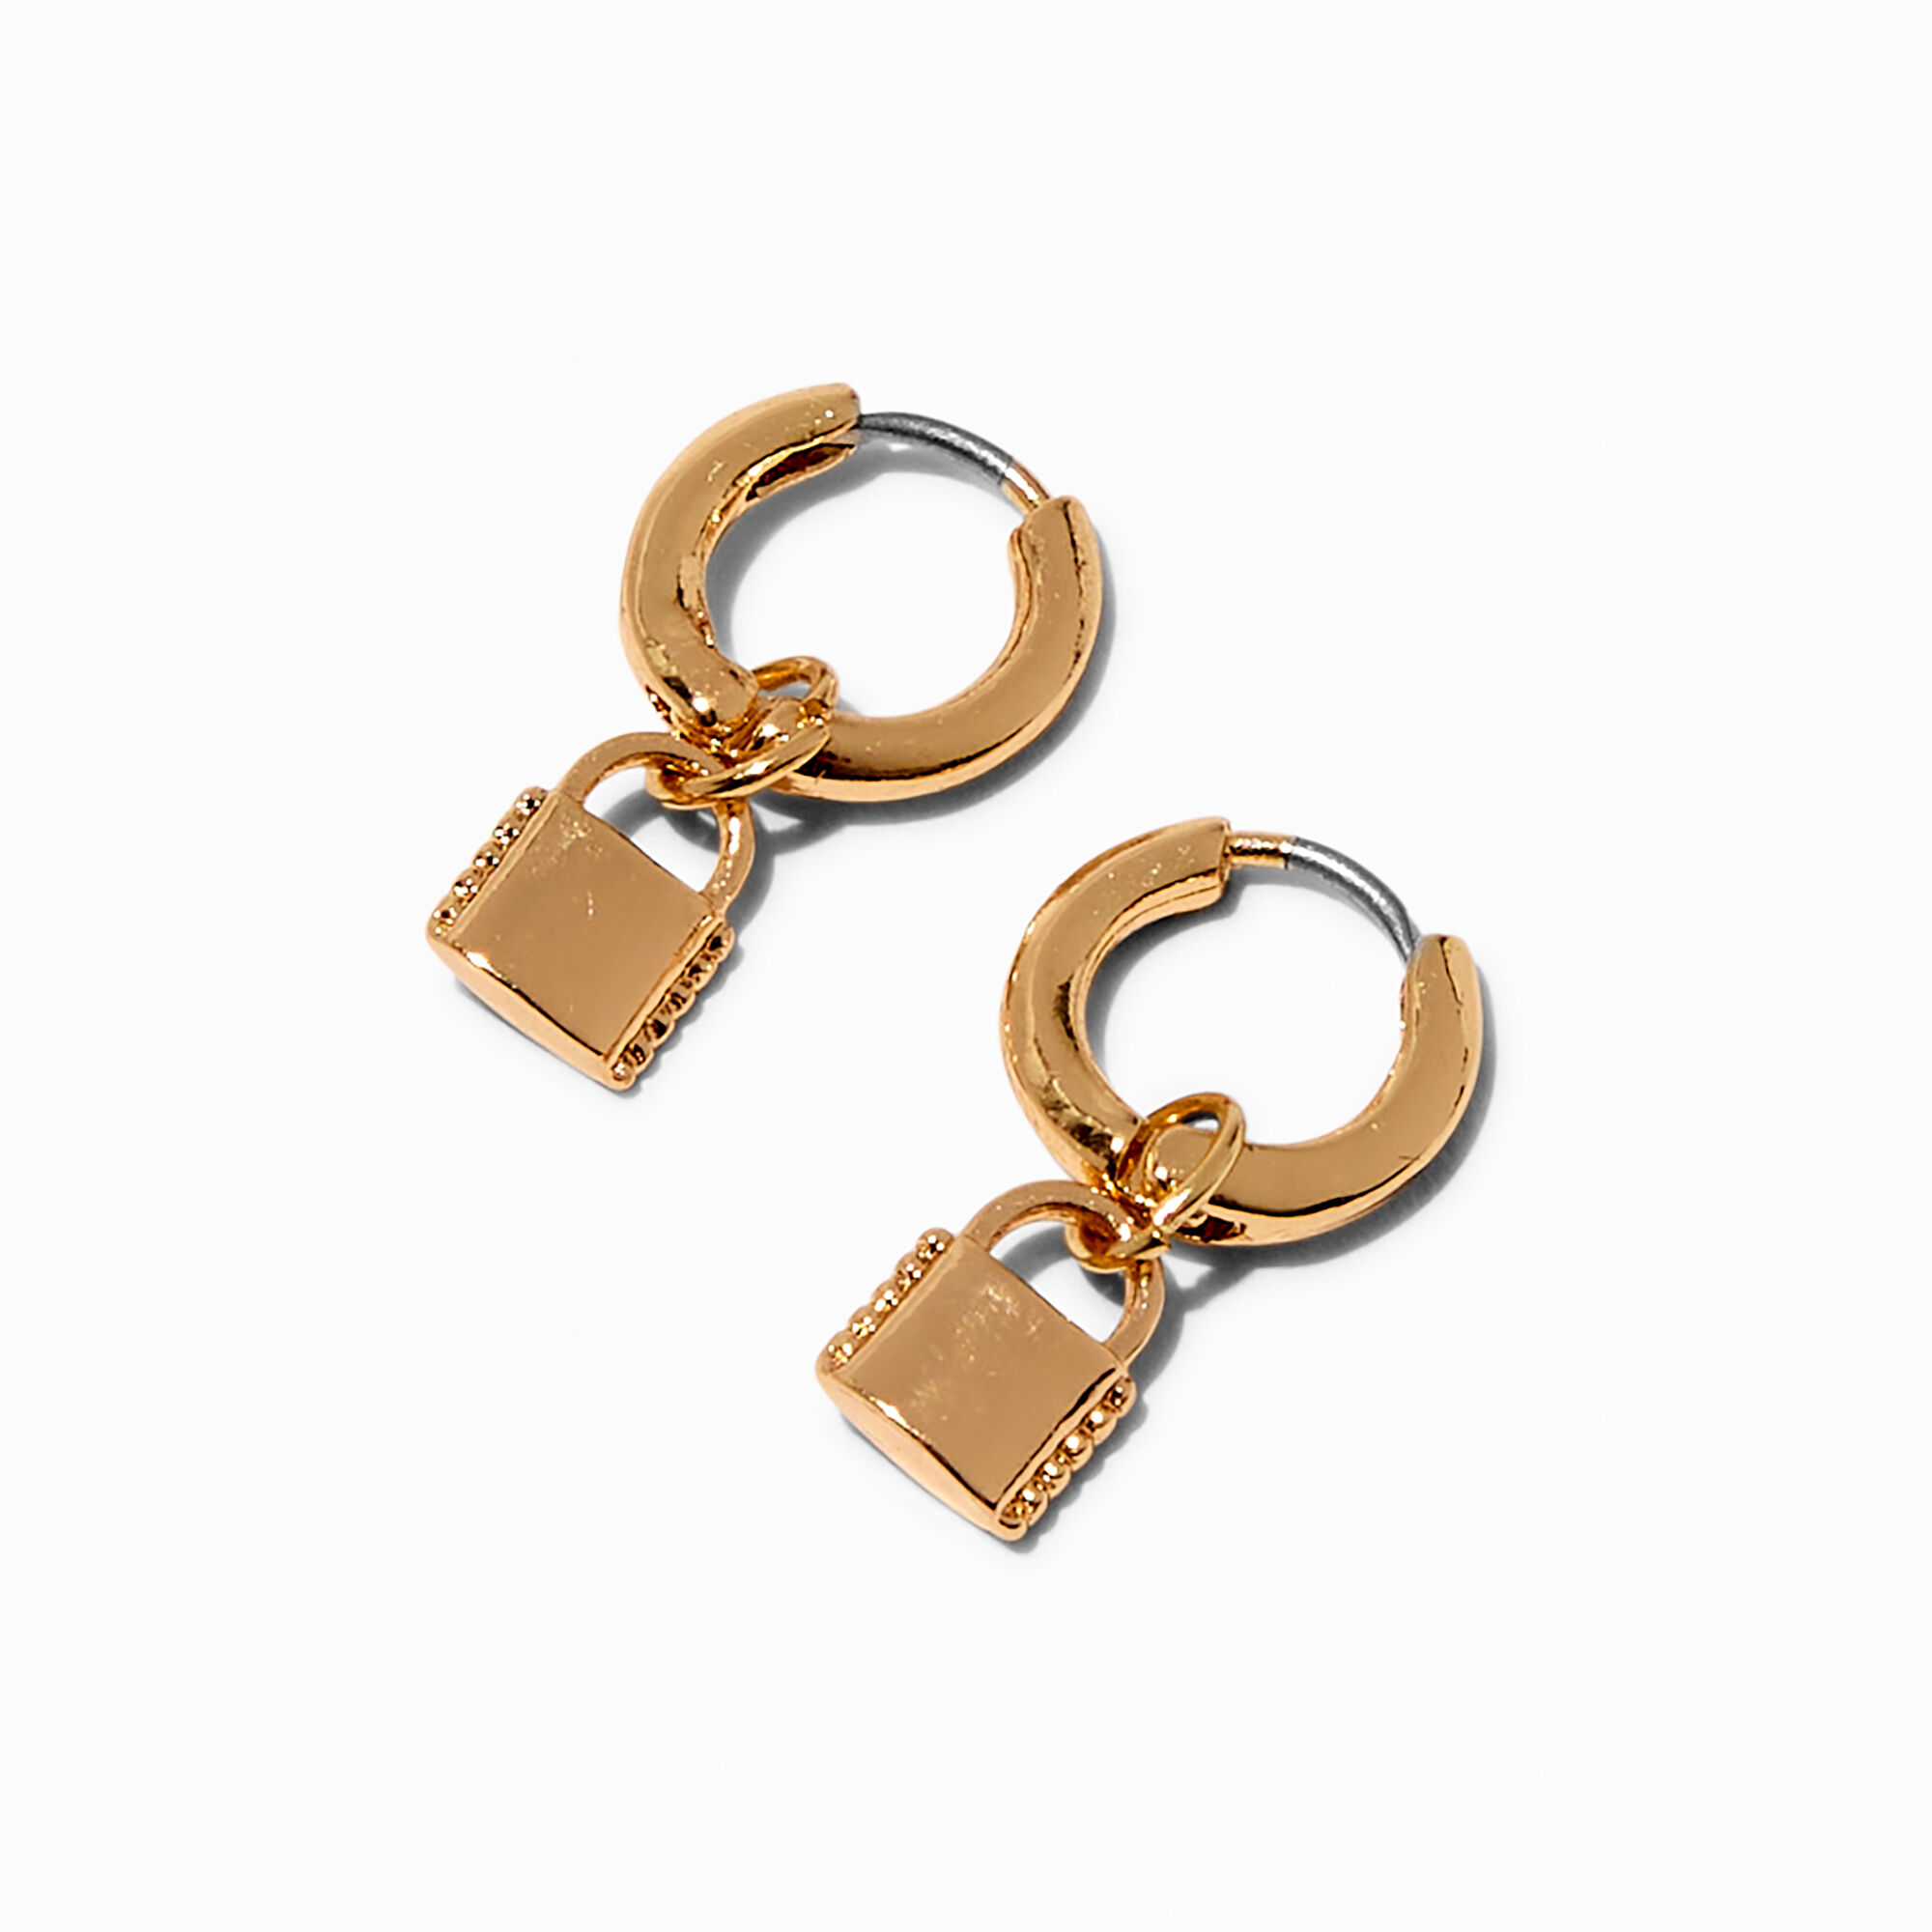 View Claires Lock Charm Tone 05 Drop Earrings Gold information